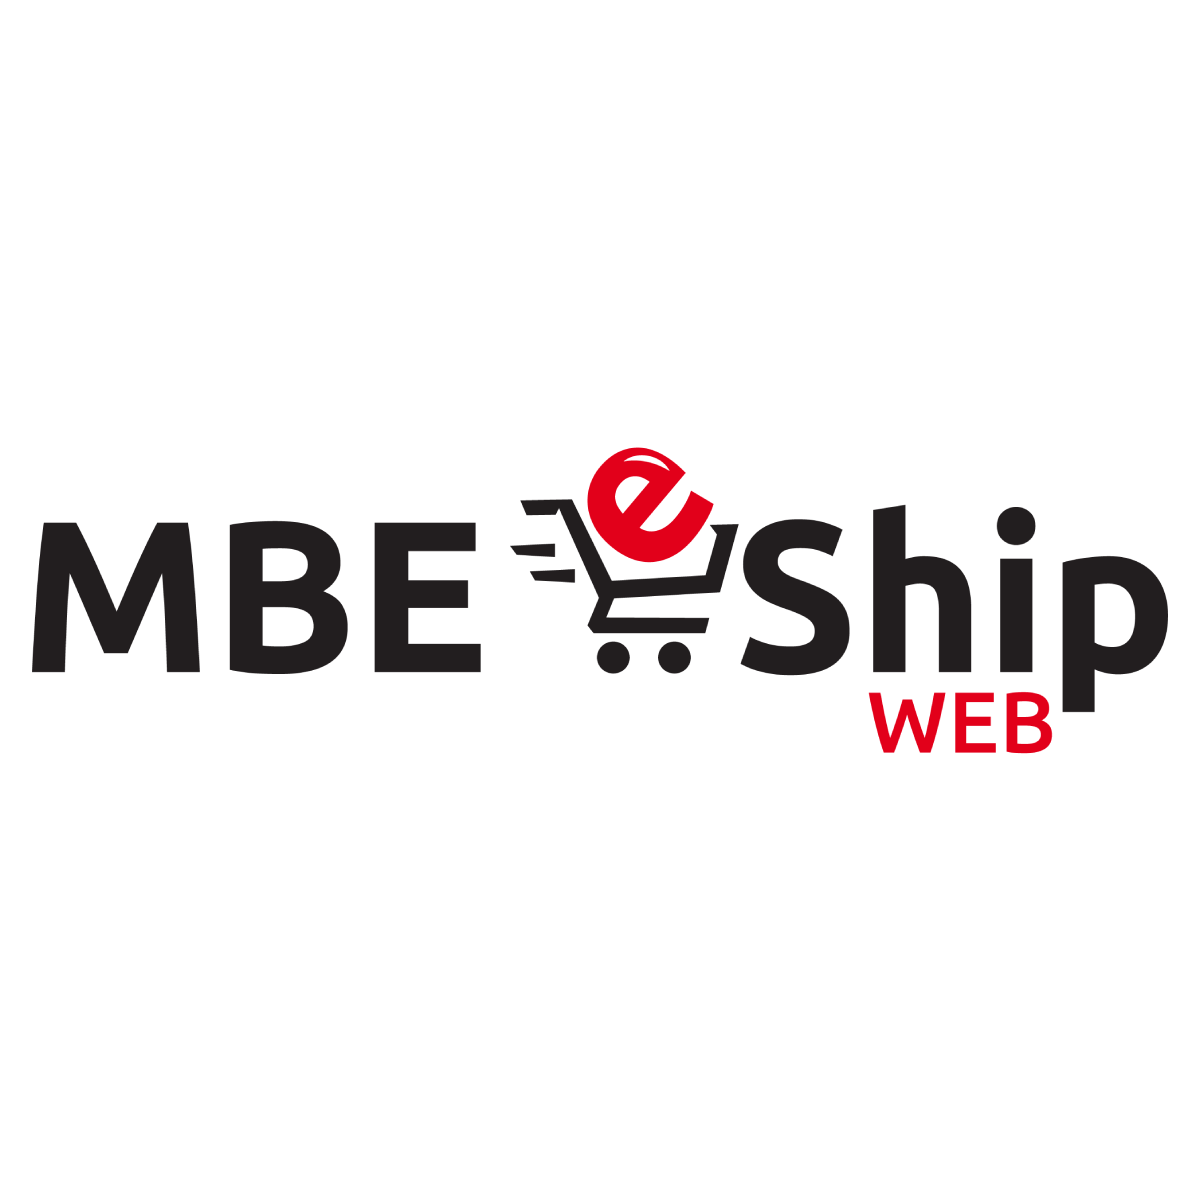 Hire Shopify Experts to integrate MBE eShip WEB app into a Shopify store